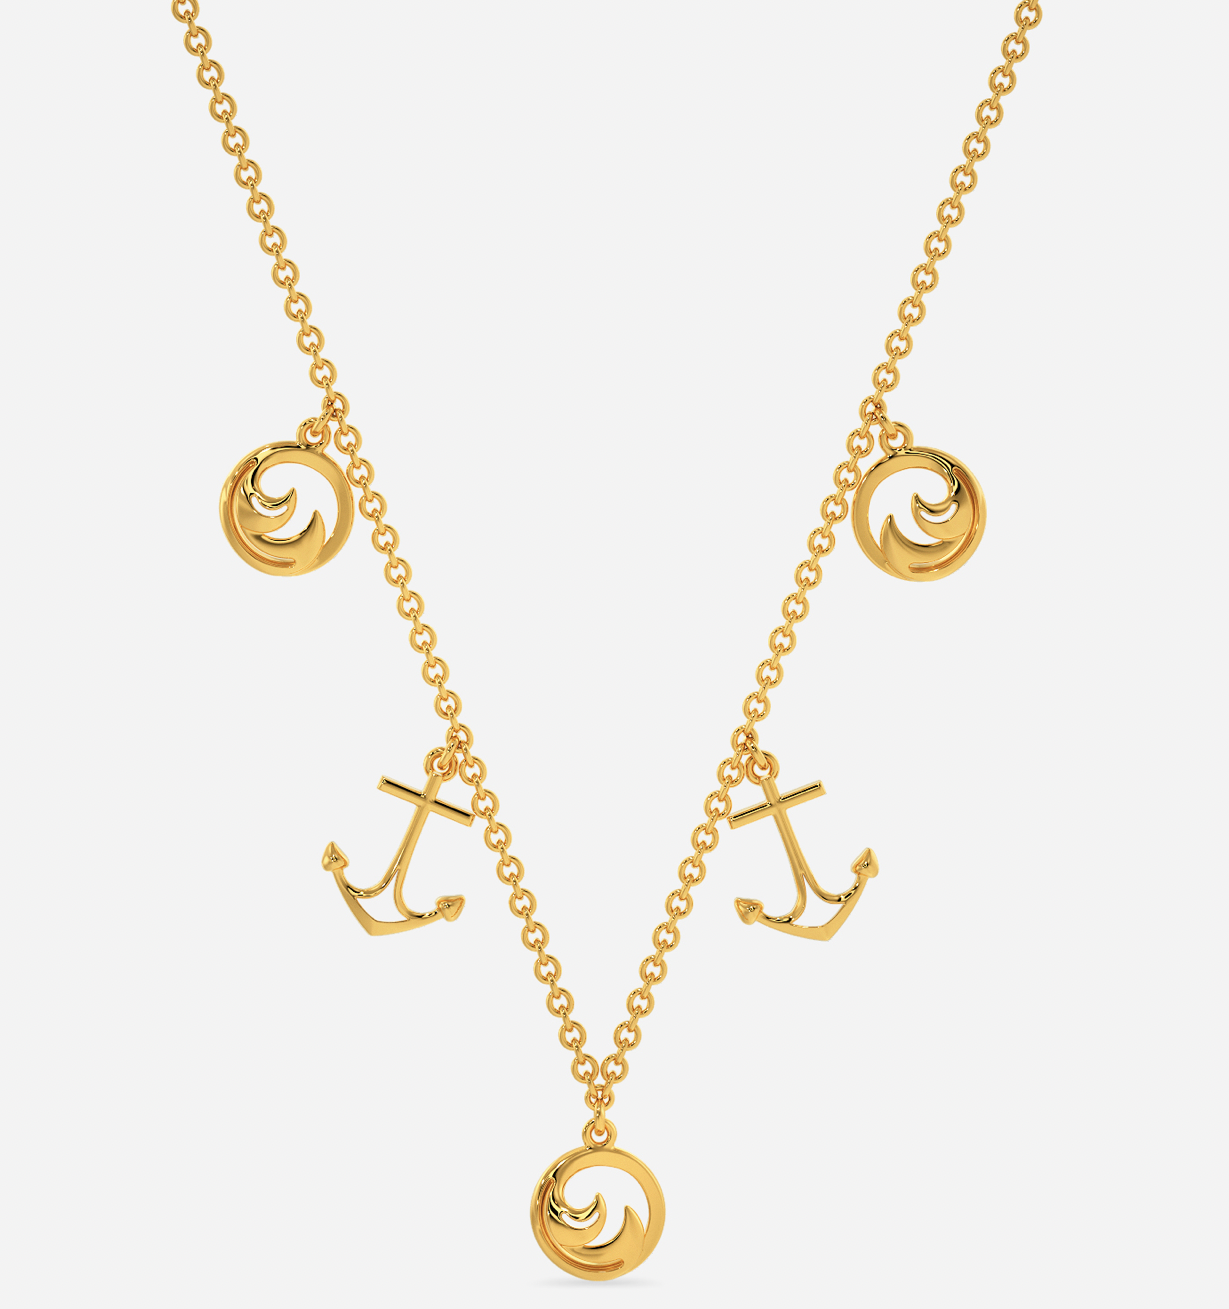 Exquisite Waves Gold Necklace